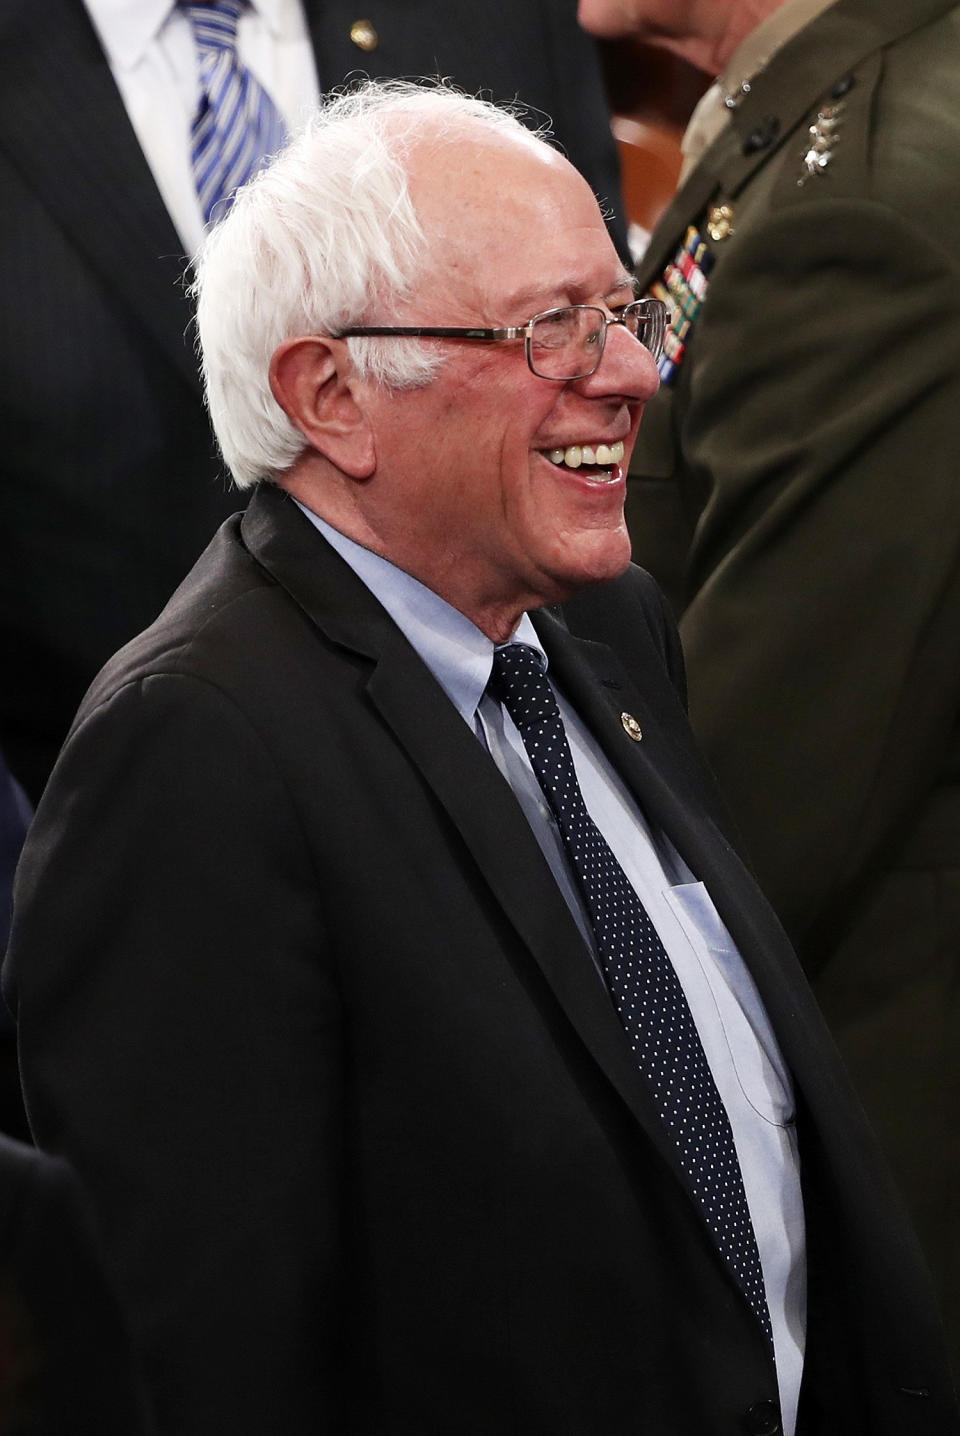 WASHINGTON, DC - FEBRUARY 28:  Sen. Bernie Sanders (D-VT) arrives to a joint session of the U.S. Congress with U.S. President Donald Trump on February 28, 2017 in the House chamber of  the U.S. Capitol in Washington, DC. Trump's first address to Congress is expected to focus on national security, tax and regulatory reform, the economy, and healthcare.  (Photo by Win McNamee/Getty Images)